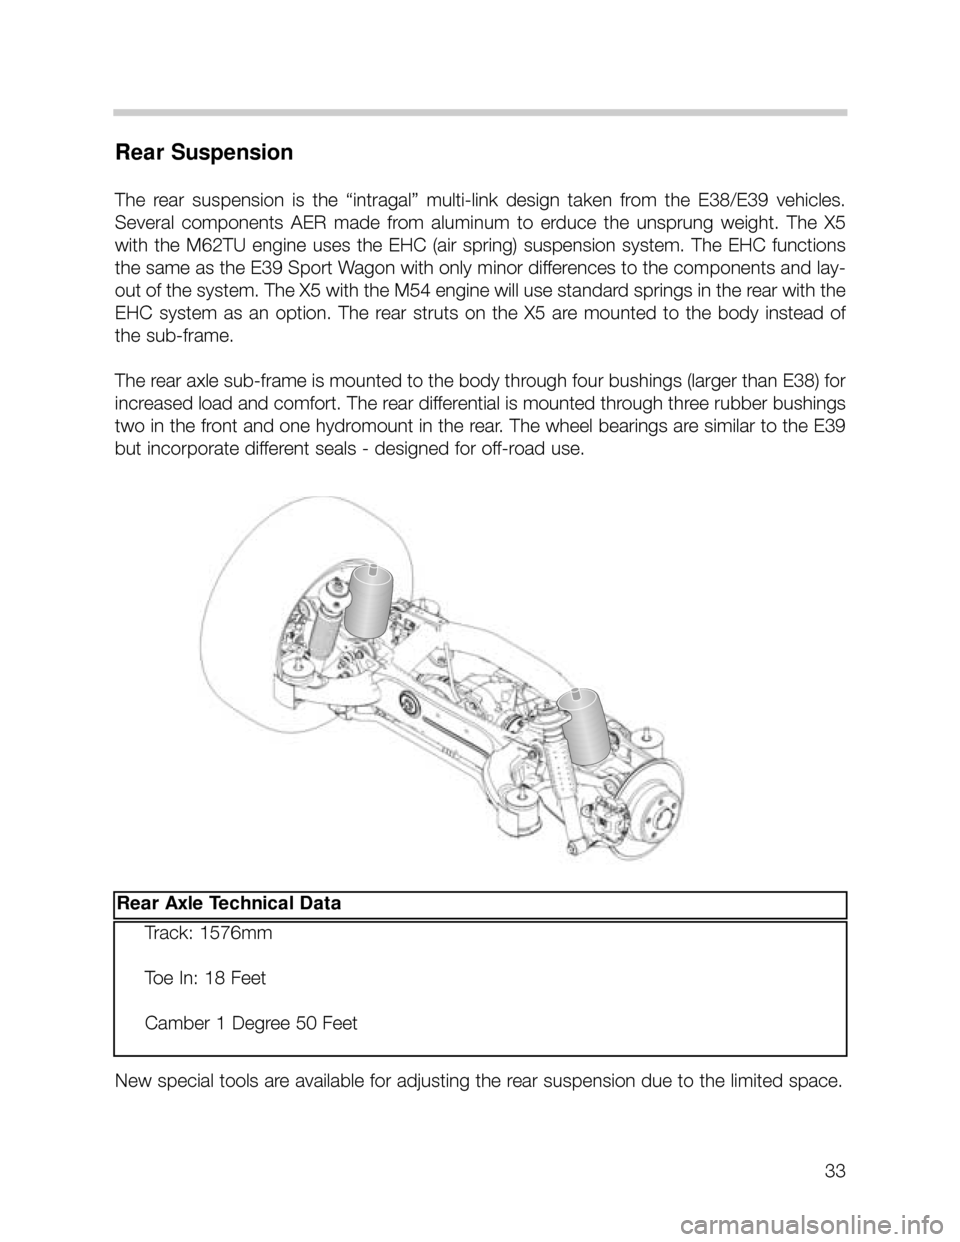 BMW X5 2003 E53 Owners Guide 33
Rear Suspension
The  rear  suspension  is  the  “intragal”  multi-link  design  taken  from  the  E38/E39  vehicles.
Several  components  AER  made  from  aluminum  to  erduce  the  unsprung  w